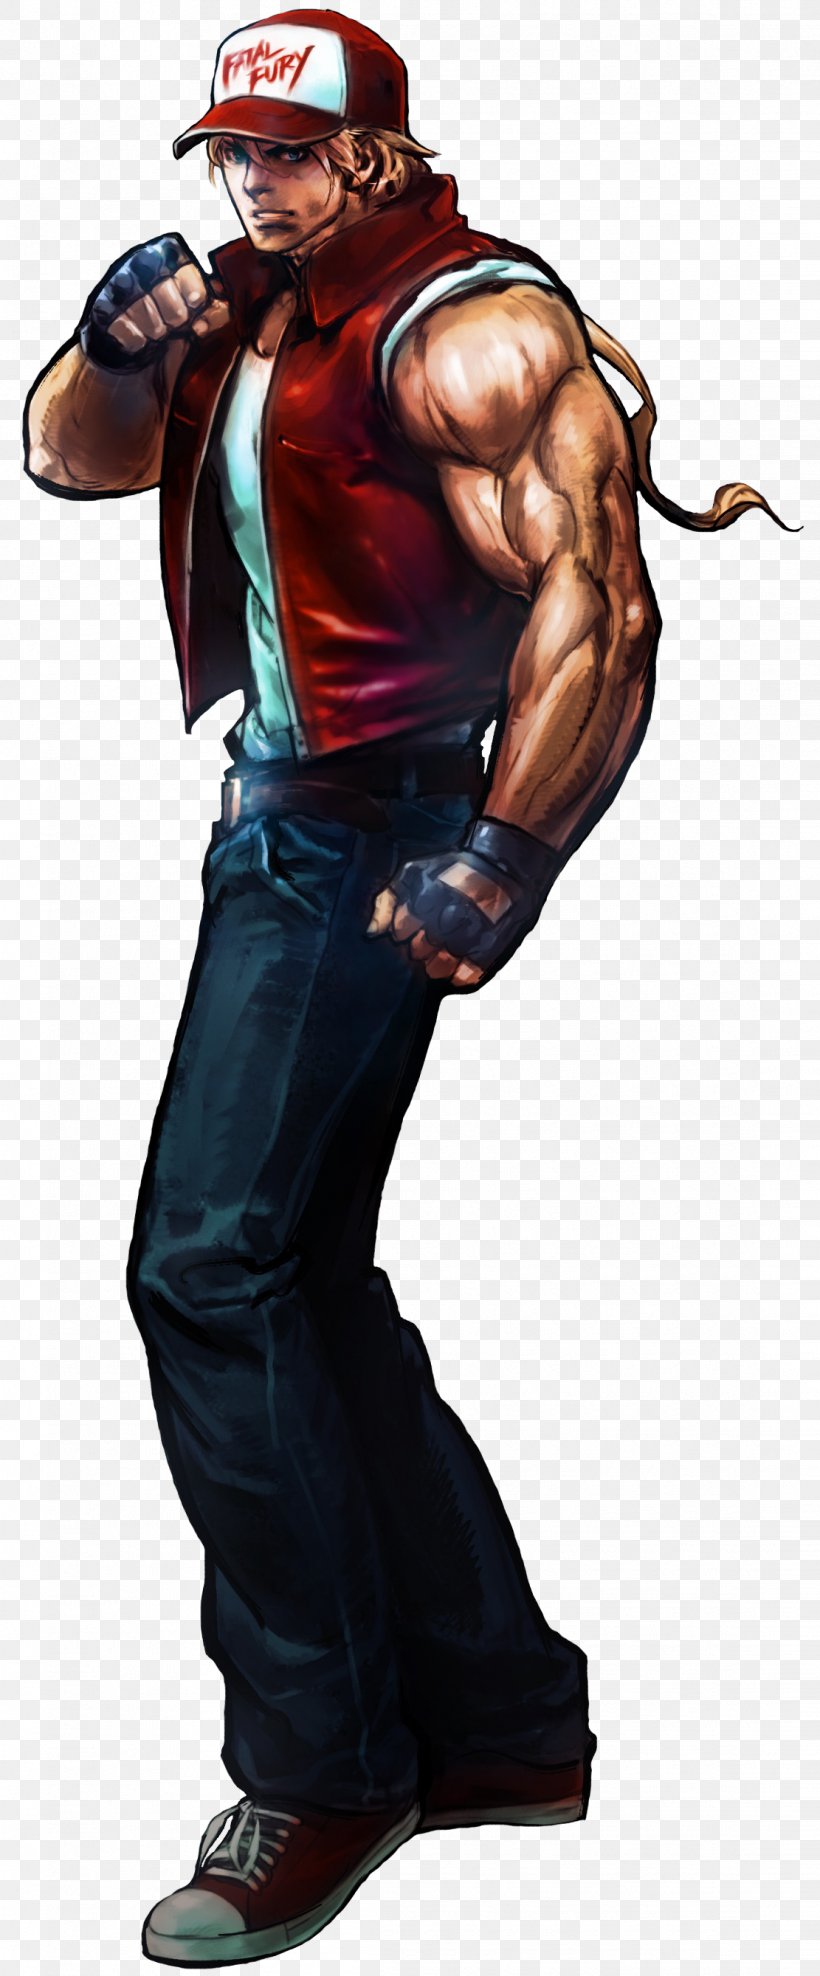 The King Of Fighters XIII Terry Bogard Capcom Vs. SNK: Millennium Fight 2000 Andy Bogard The King Of Fighters 2002, PNG, 1111x2678px, King Of Fighters Xiii, Andy Bogard, Arm, Capcom Vs Snk Millennium Fight 2000, Fatal Fury Download Free